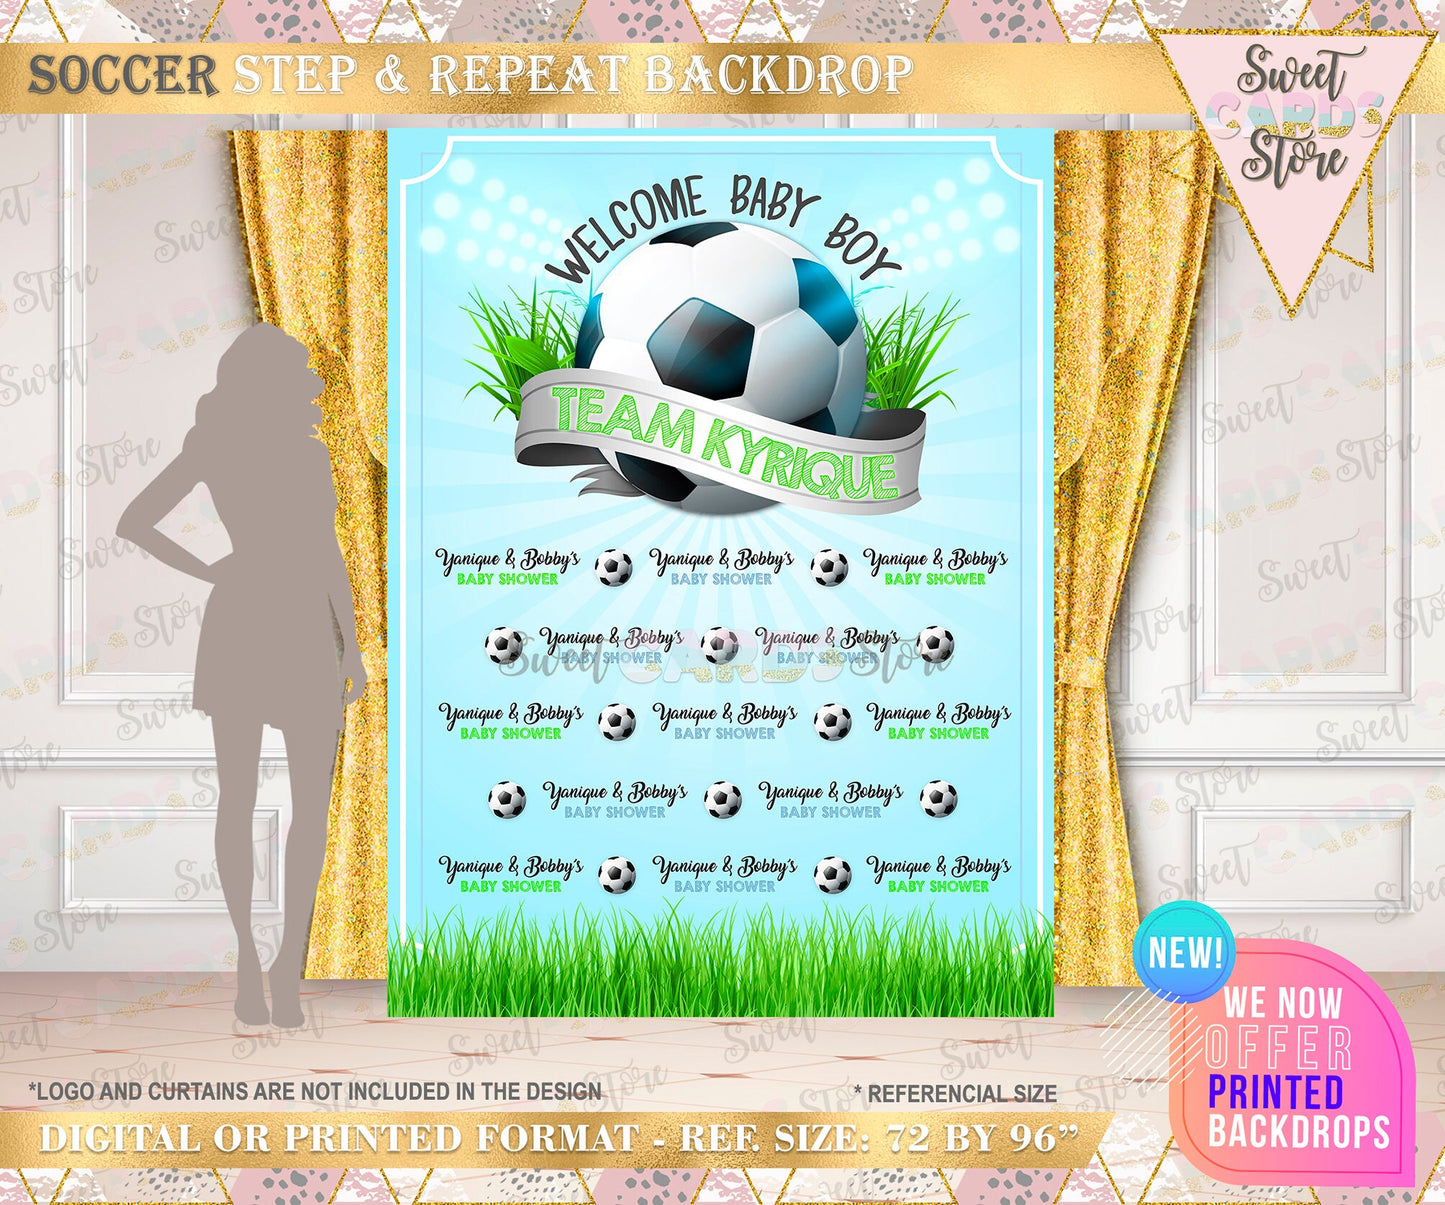 Sports Soccer party step and repeat backdrop, soccer party decor, football decor backdrop soccer banner soccer sports step & repeat backdrop